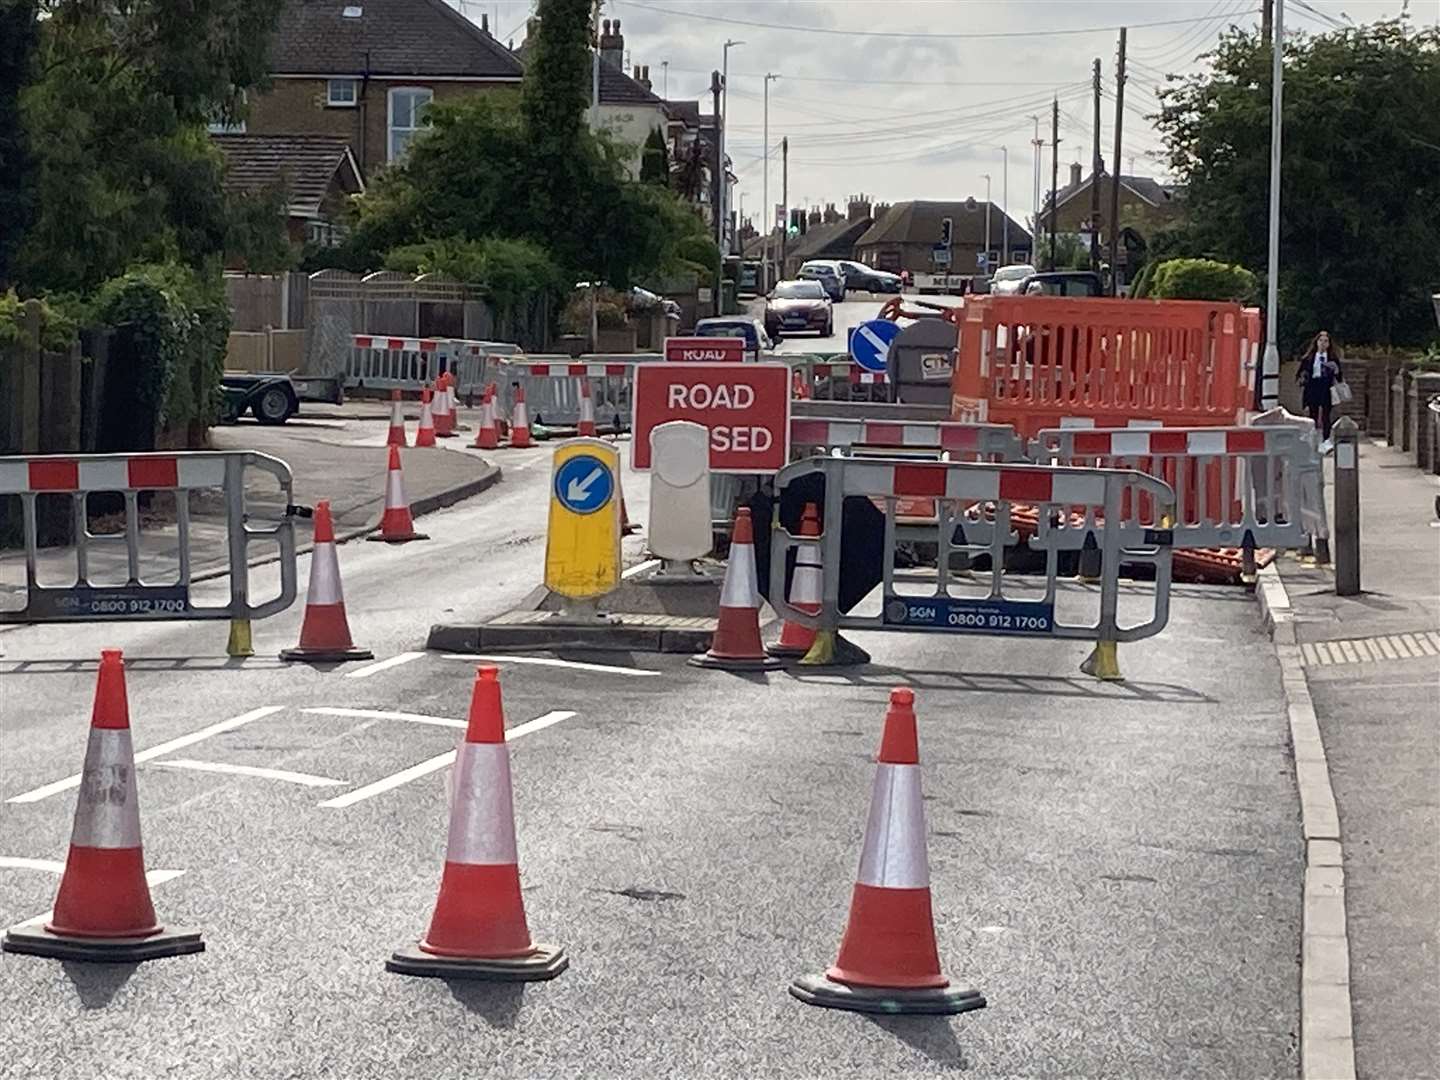 Repair work closed the recently resurfaced Minster Road at Halfway